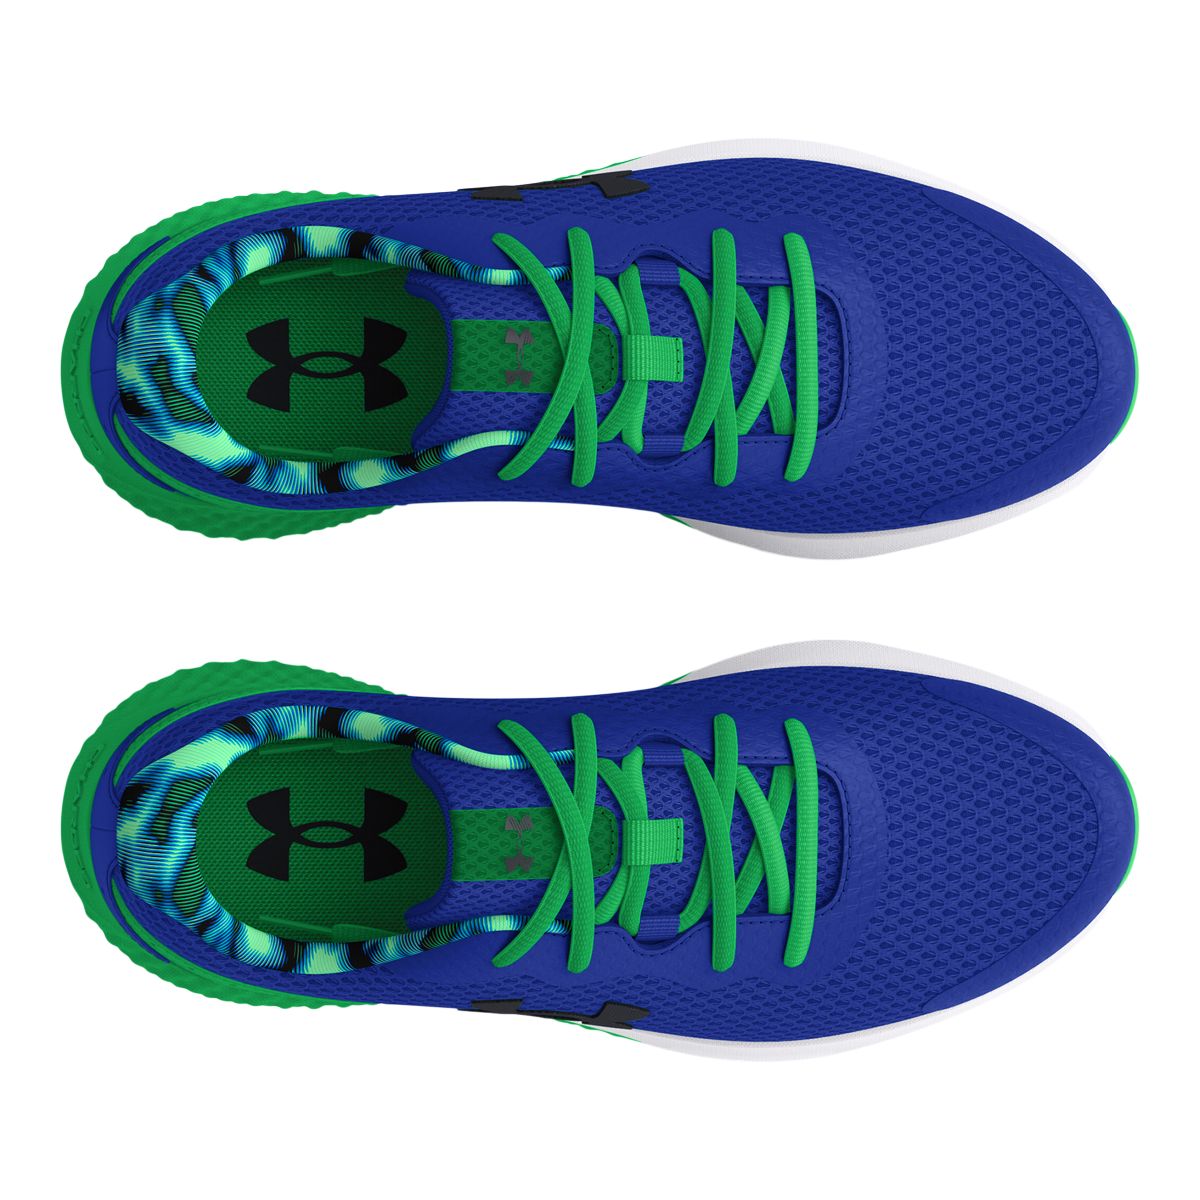 Under Armour Charged Rogue 3 AL Boy's Pre-School Running Shoes